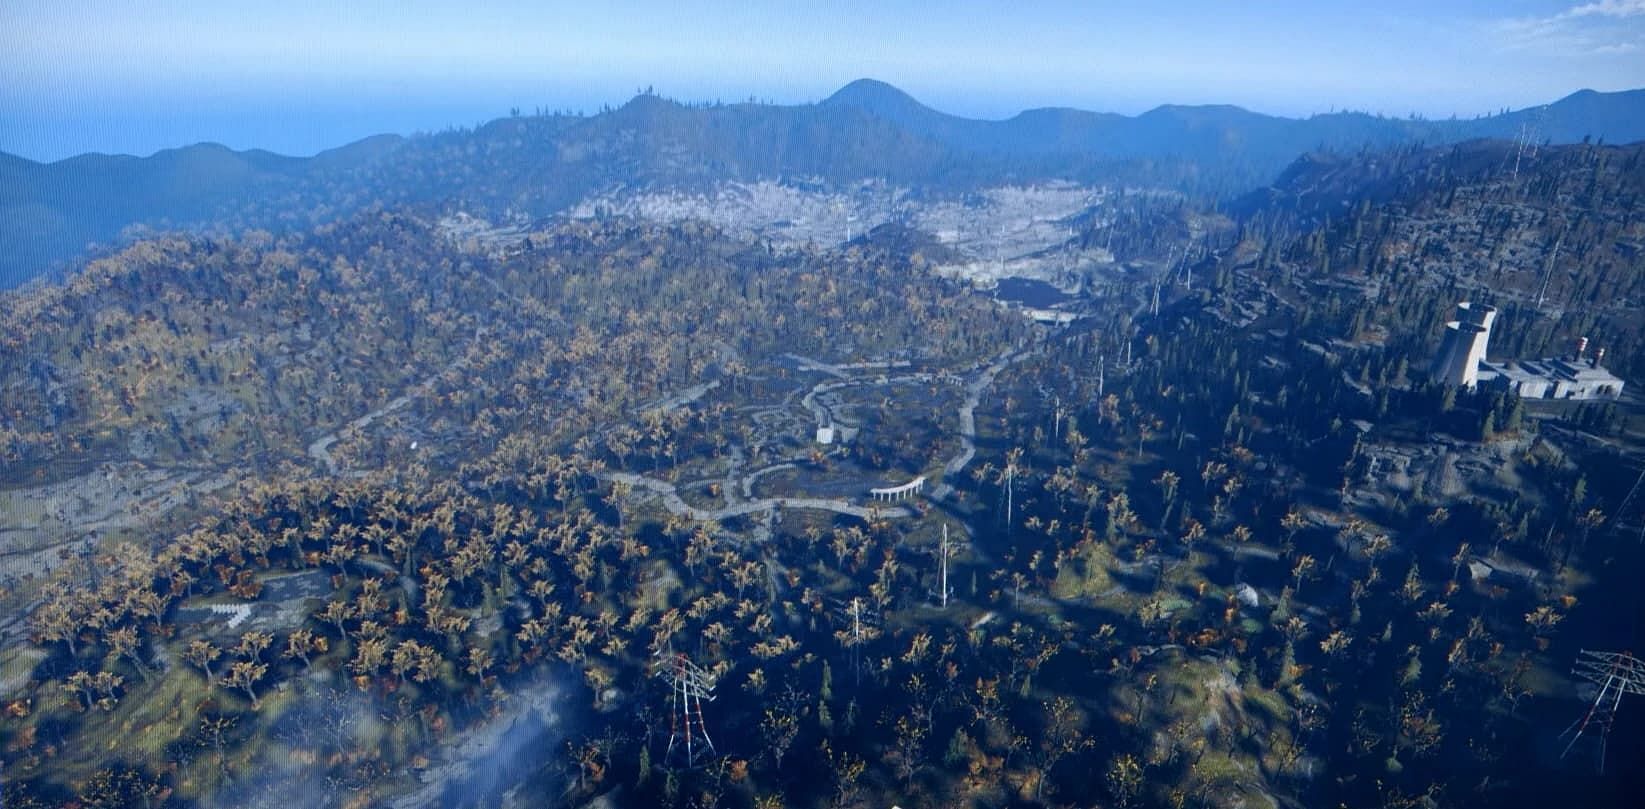 The Forest is the first region players will see in Fallout 76 (Image via Bethesda)